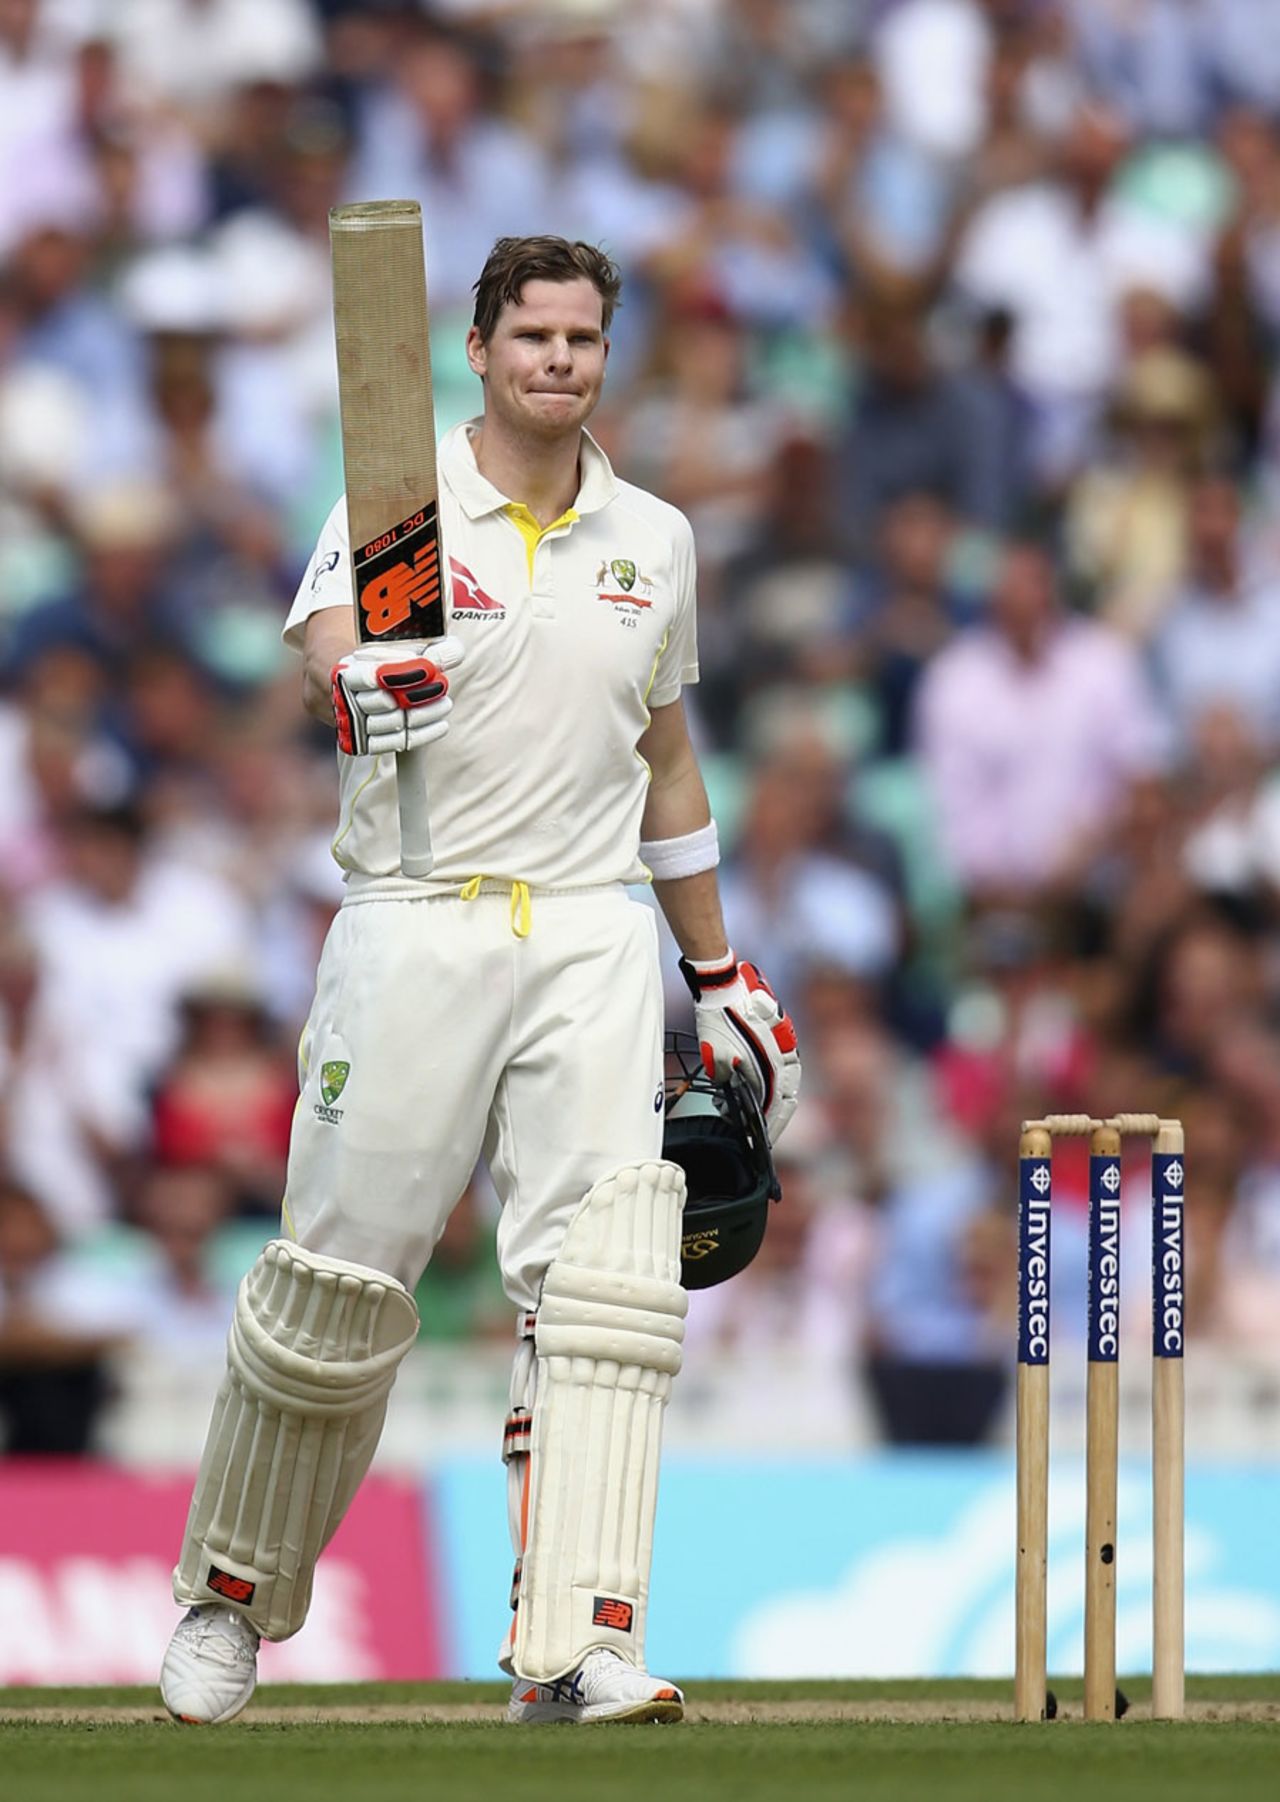 Steven Smith went to his 11th Test hundred, England v Australia, 5th Investec Ashes Test, The Oval, 2nd day, August 21, 2015